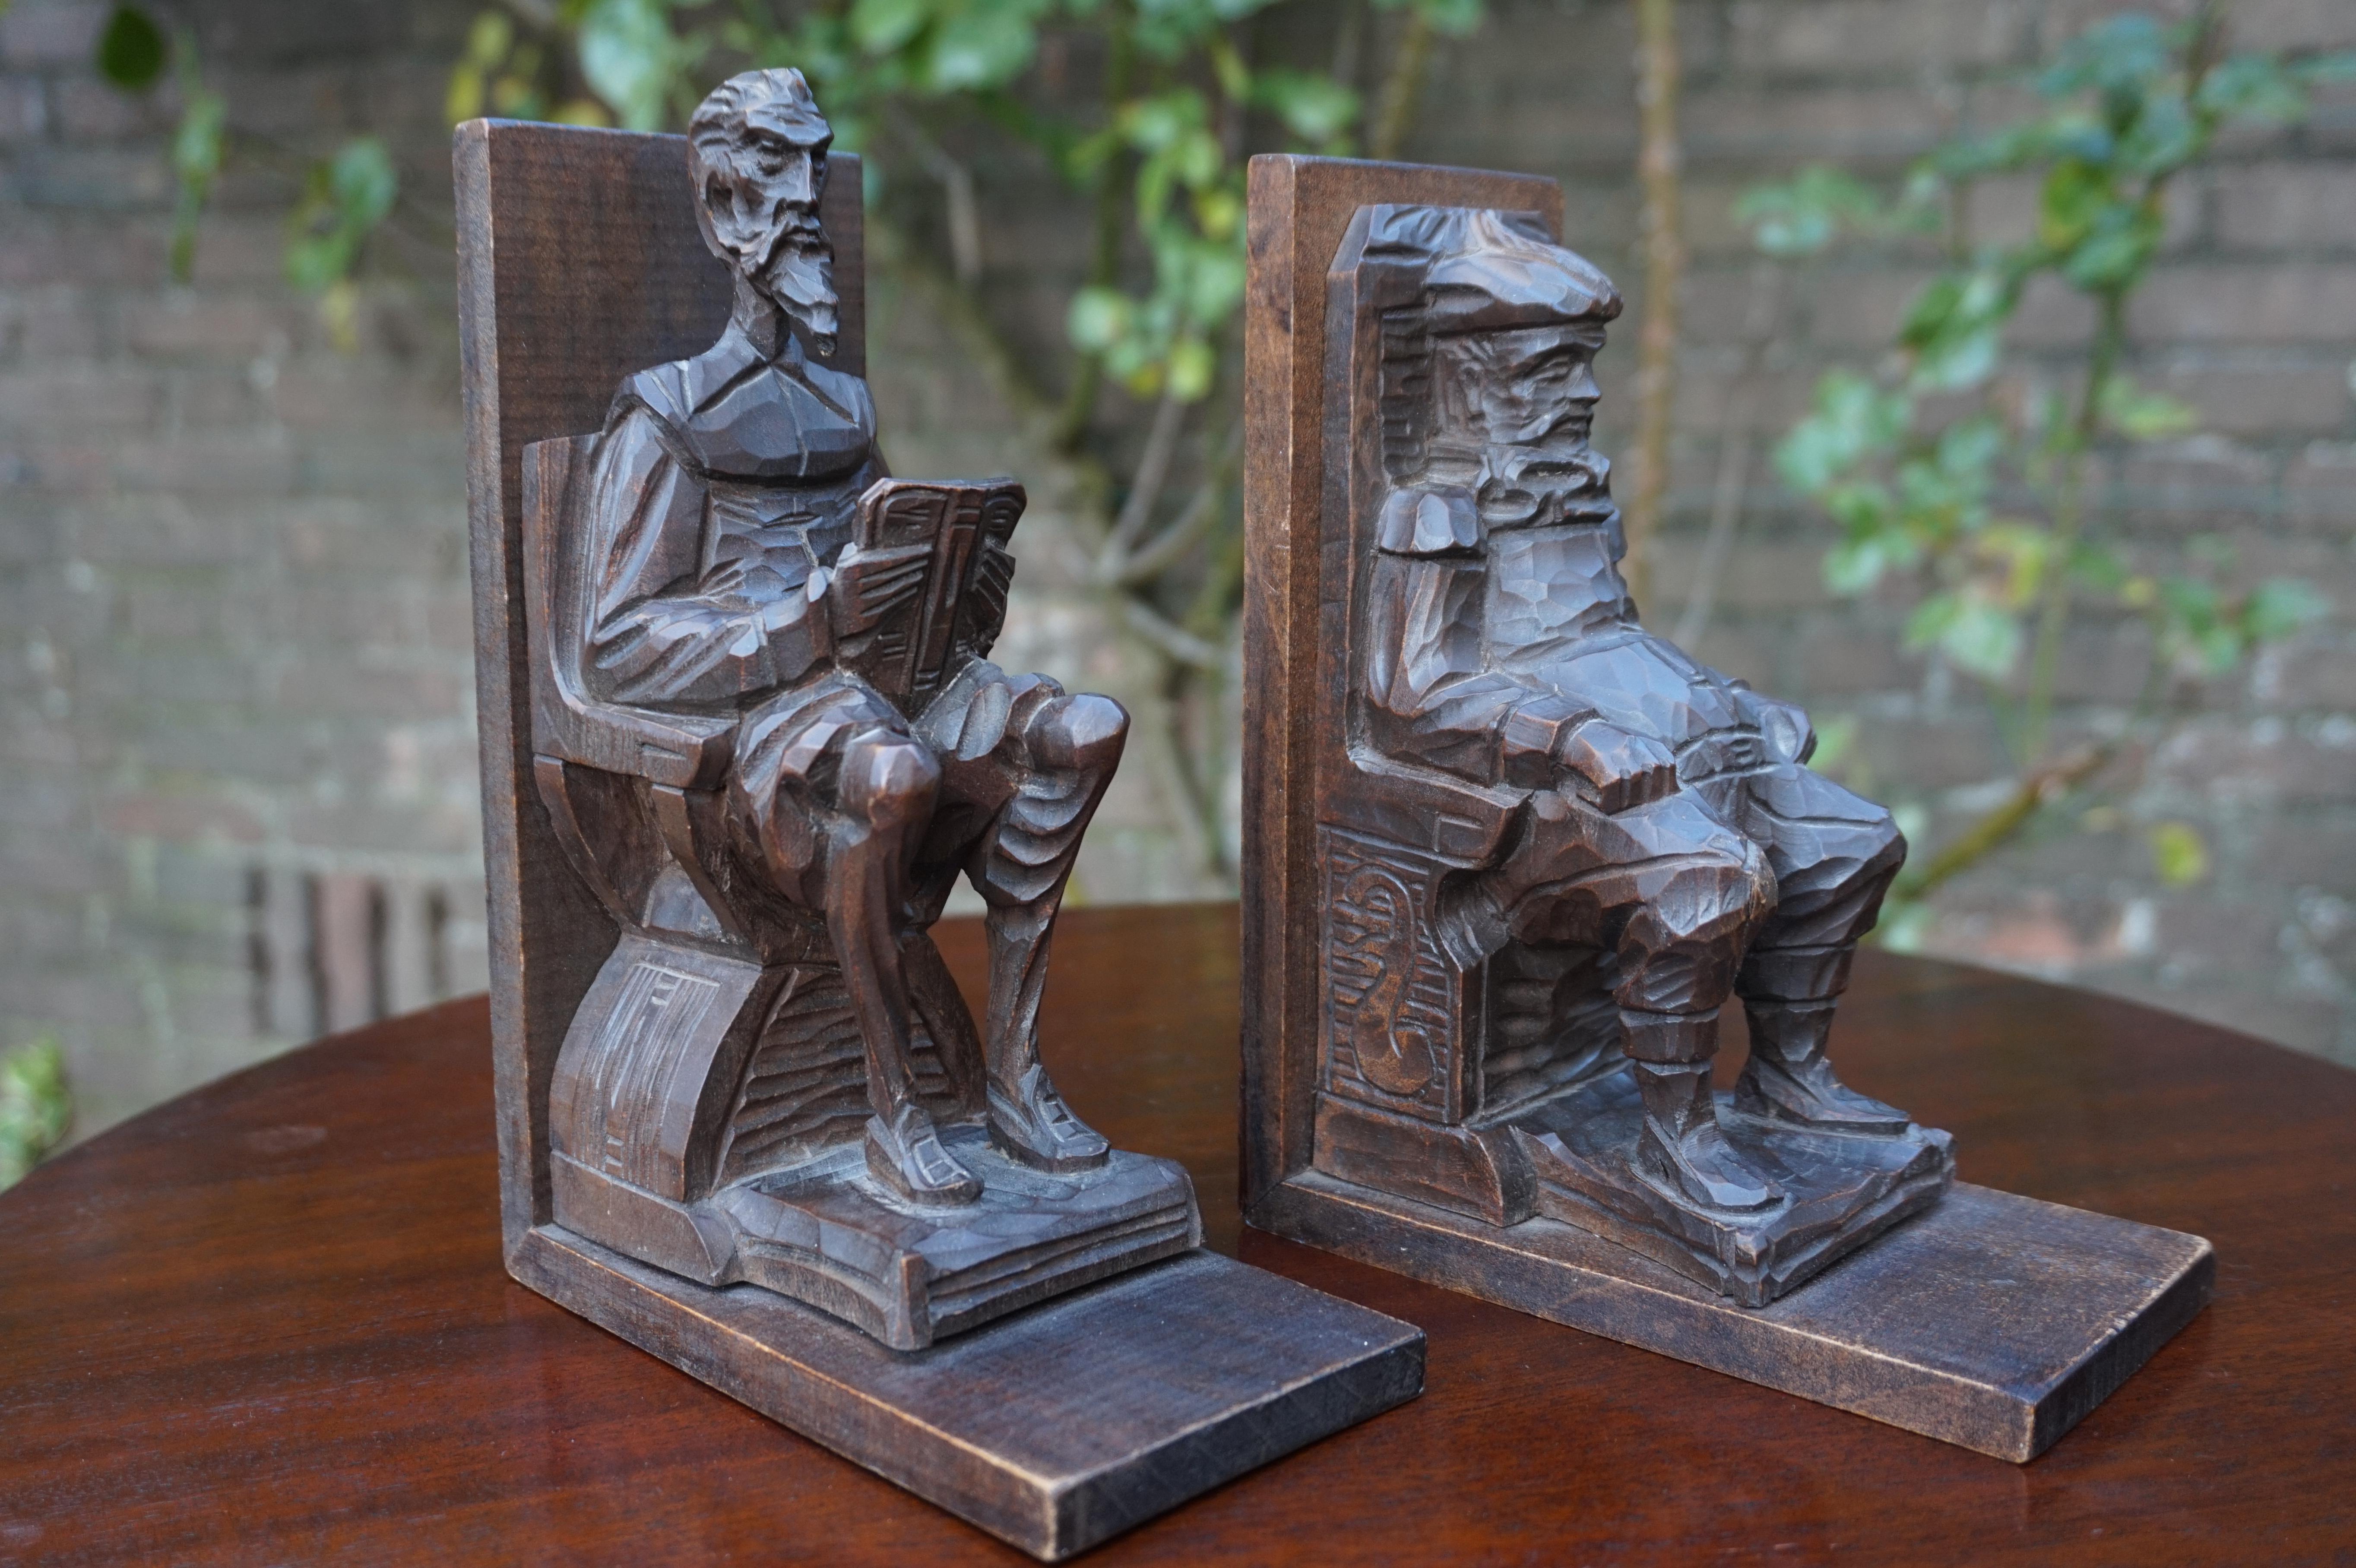 Well carved and mint condition, famous novel bookends.

If you are looking for a pair of decorative, practical and well crafted bookends then this rare pair could be perfect for you. The taller and slimmer figure obviously is Don Quixote. Here he is